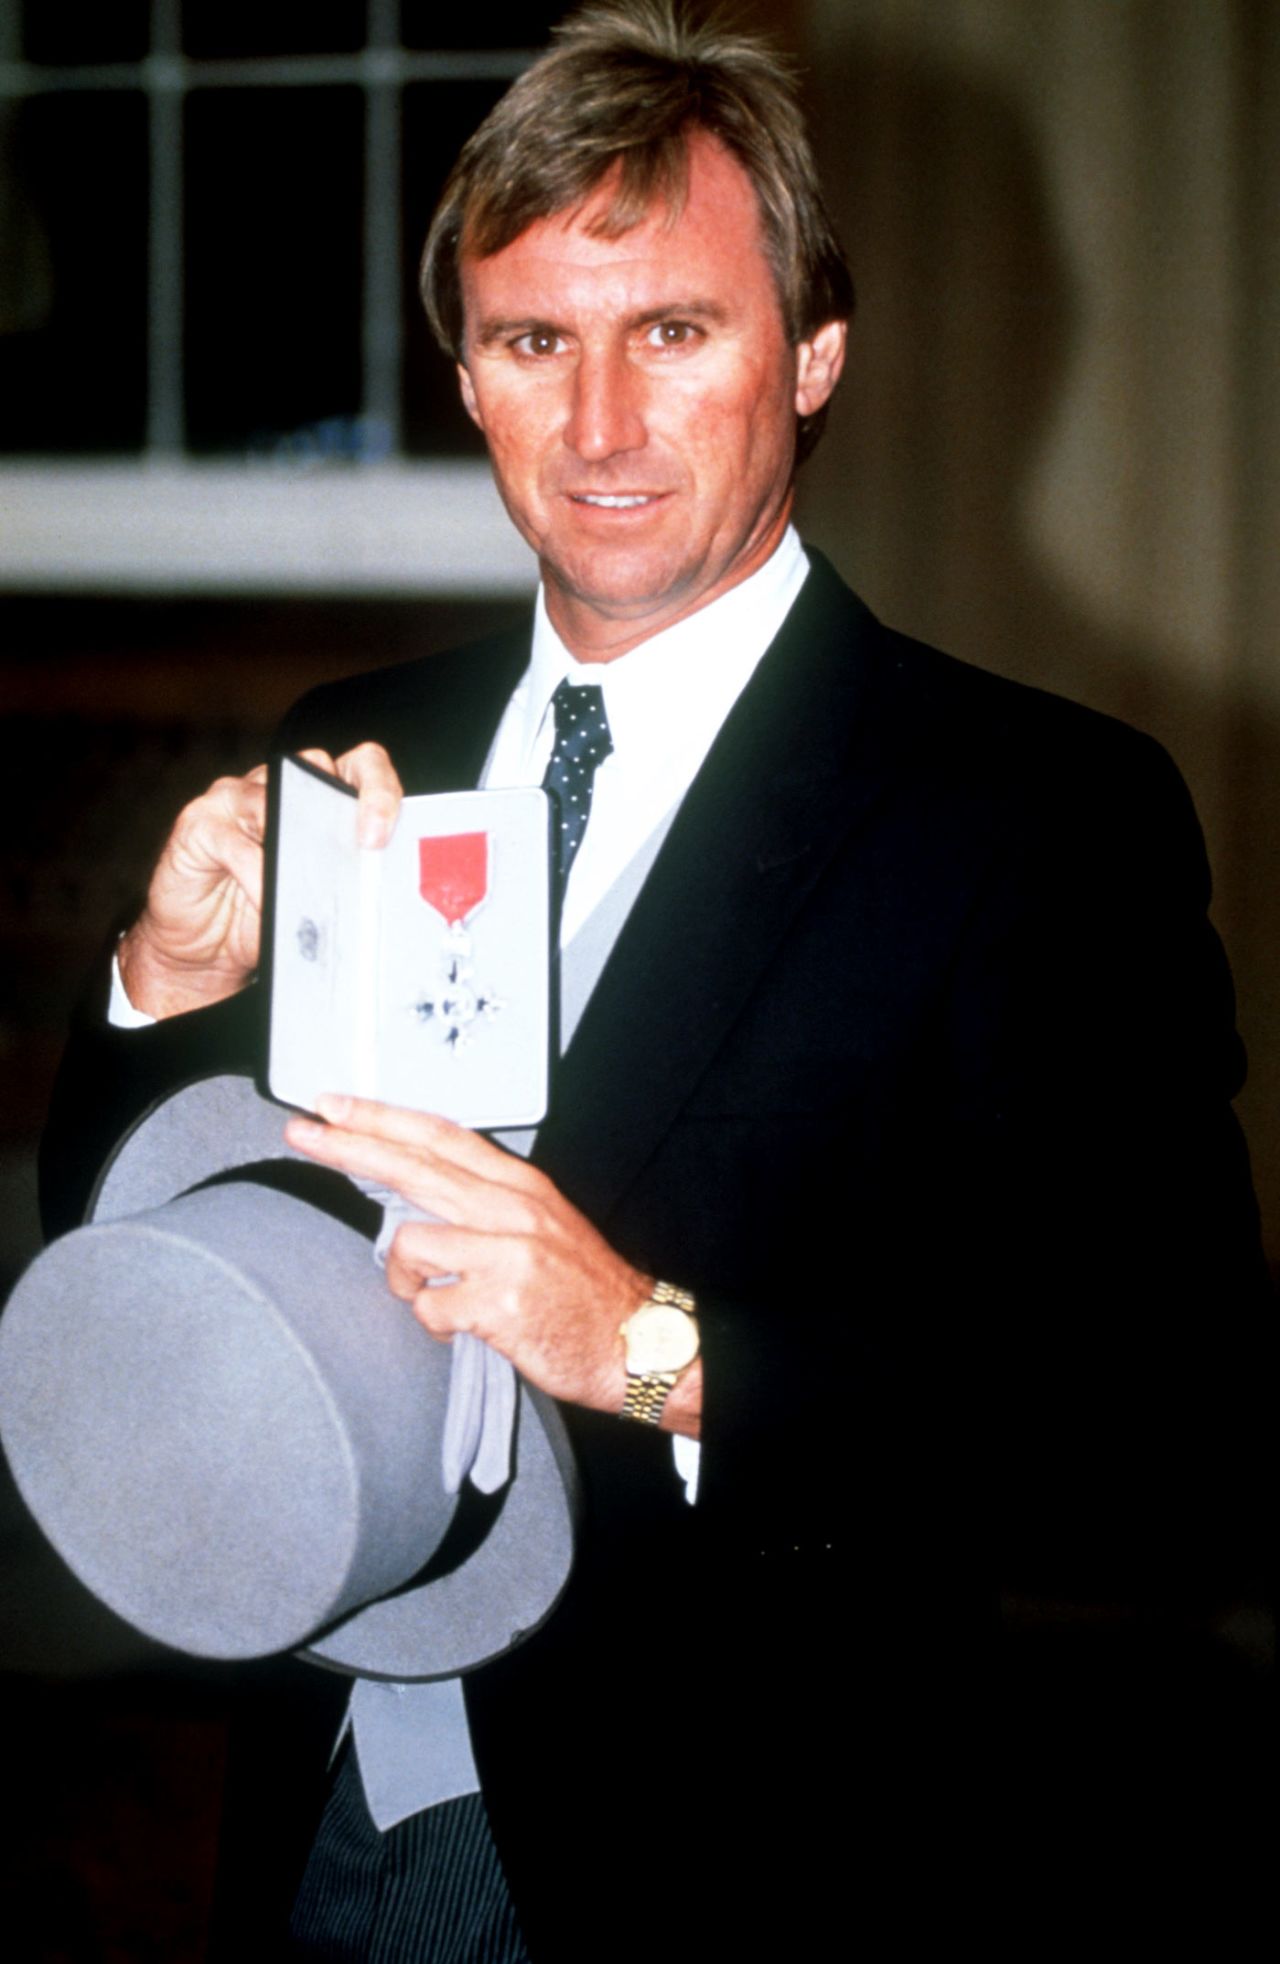 John Lever poses with his MBE, London, November 16, 1990